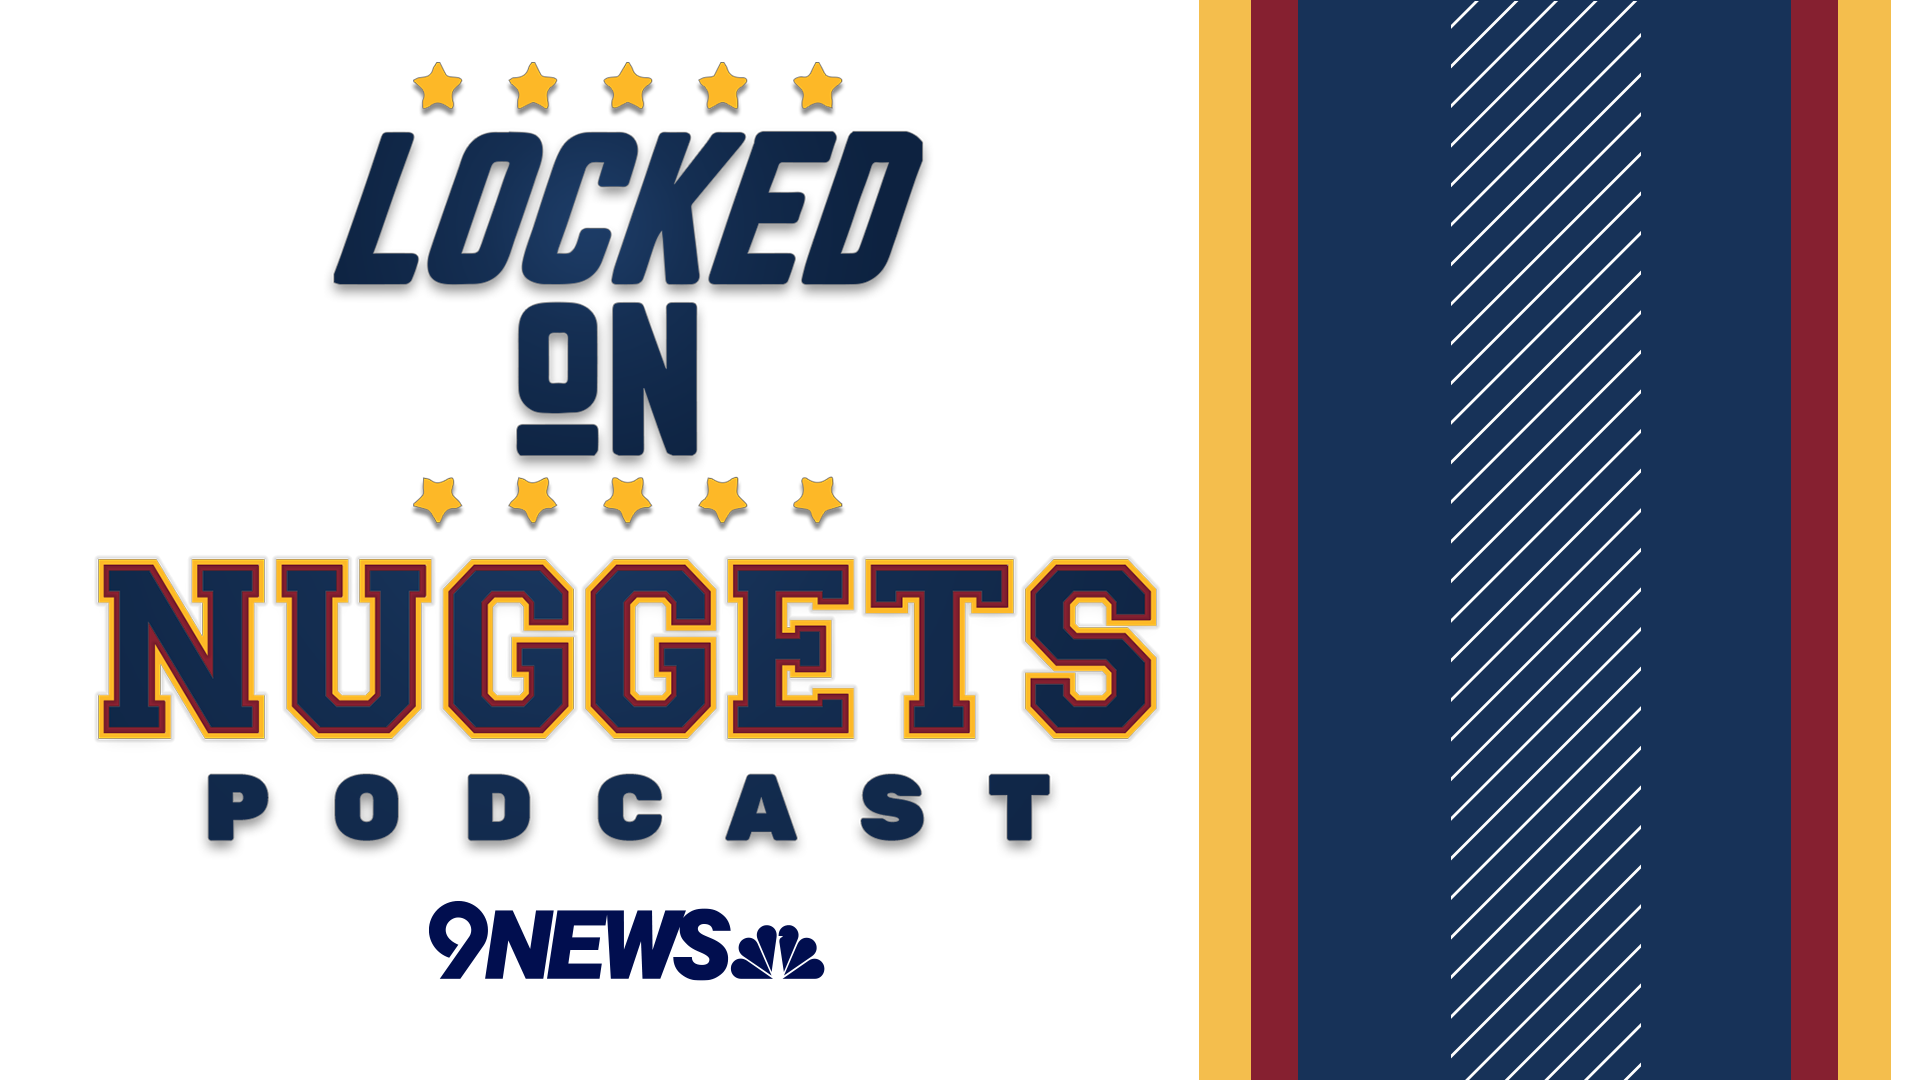 The Locked On Nuggets podcast team talks about the Denver Nuggets' 2020 NBA Draft.